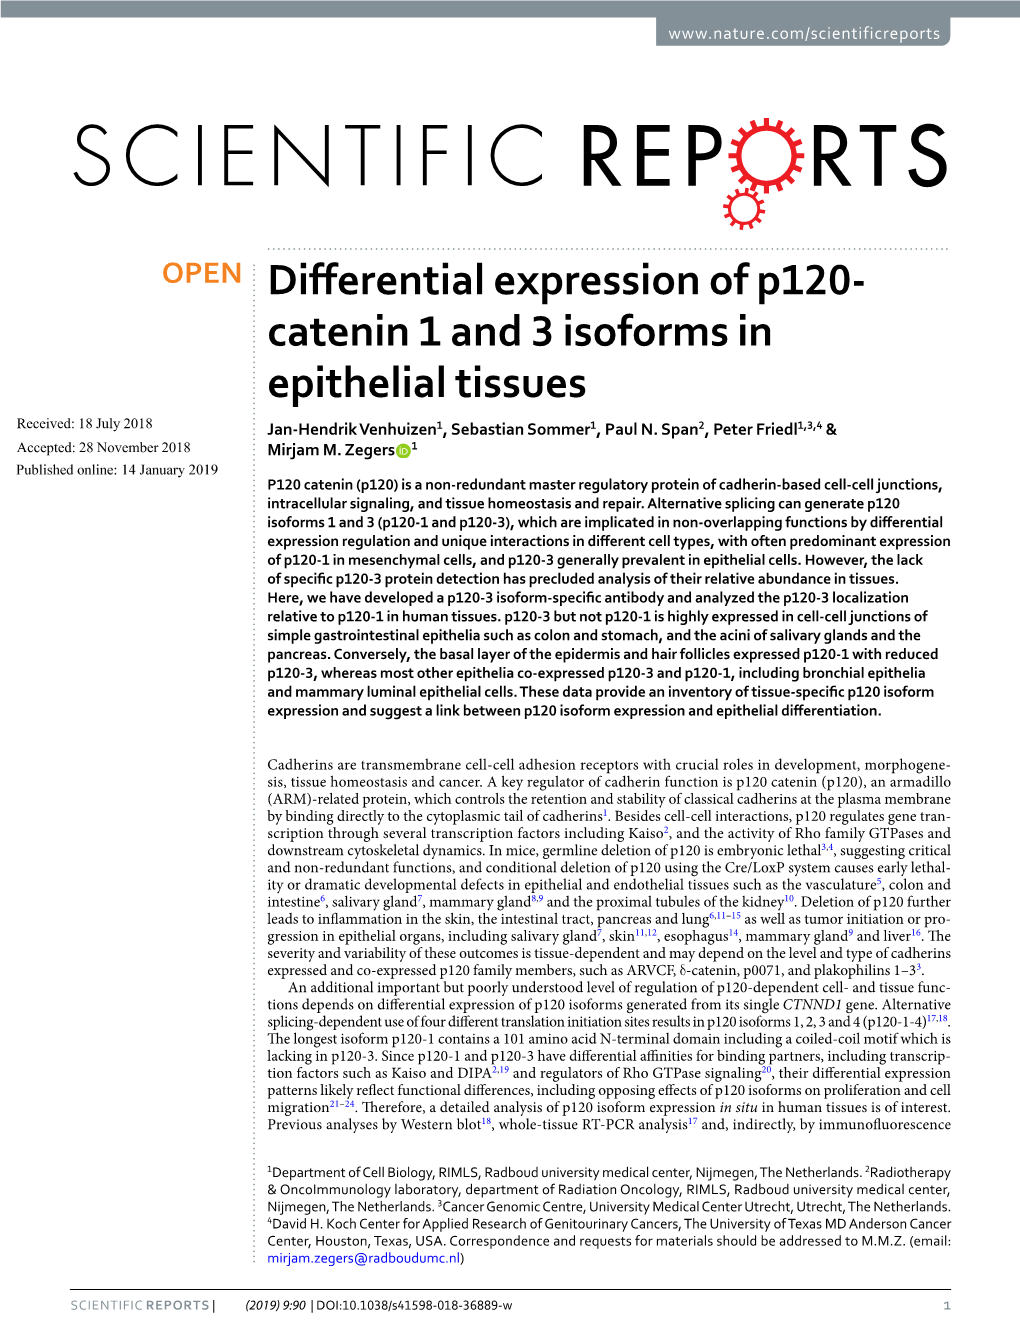 Differential Expression of P120-Catenin 1 and 3 Isoforms In